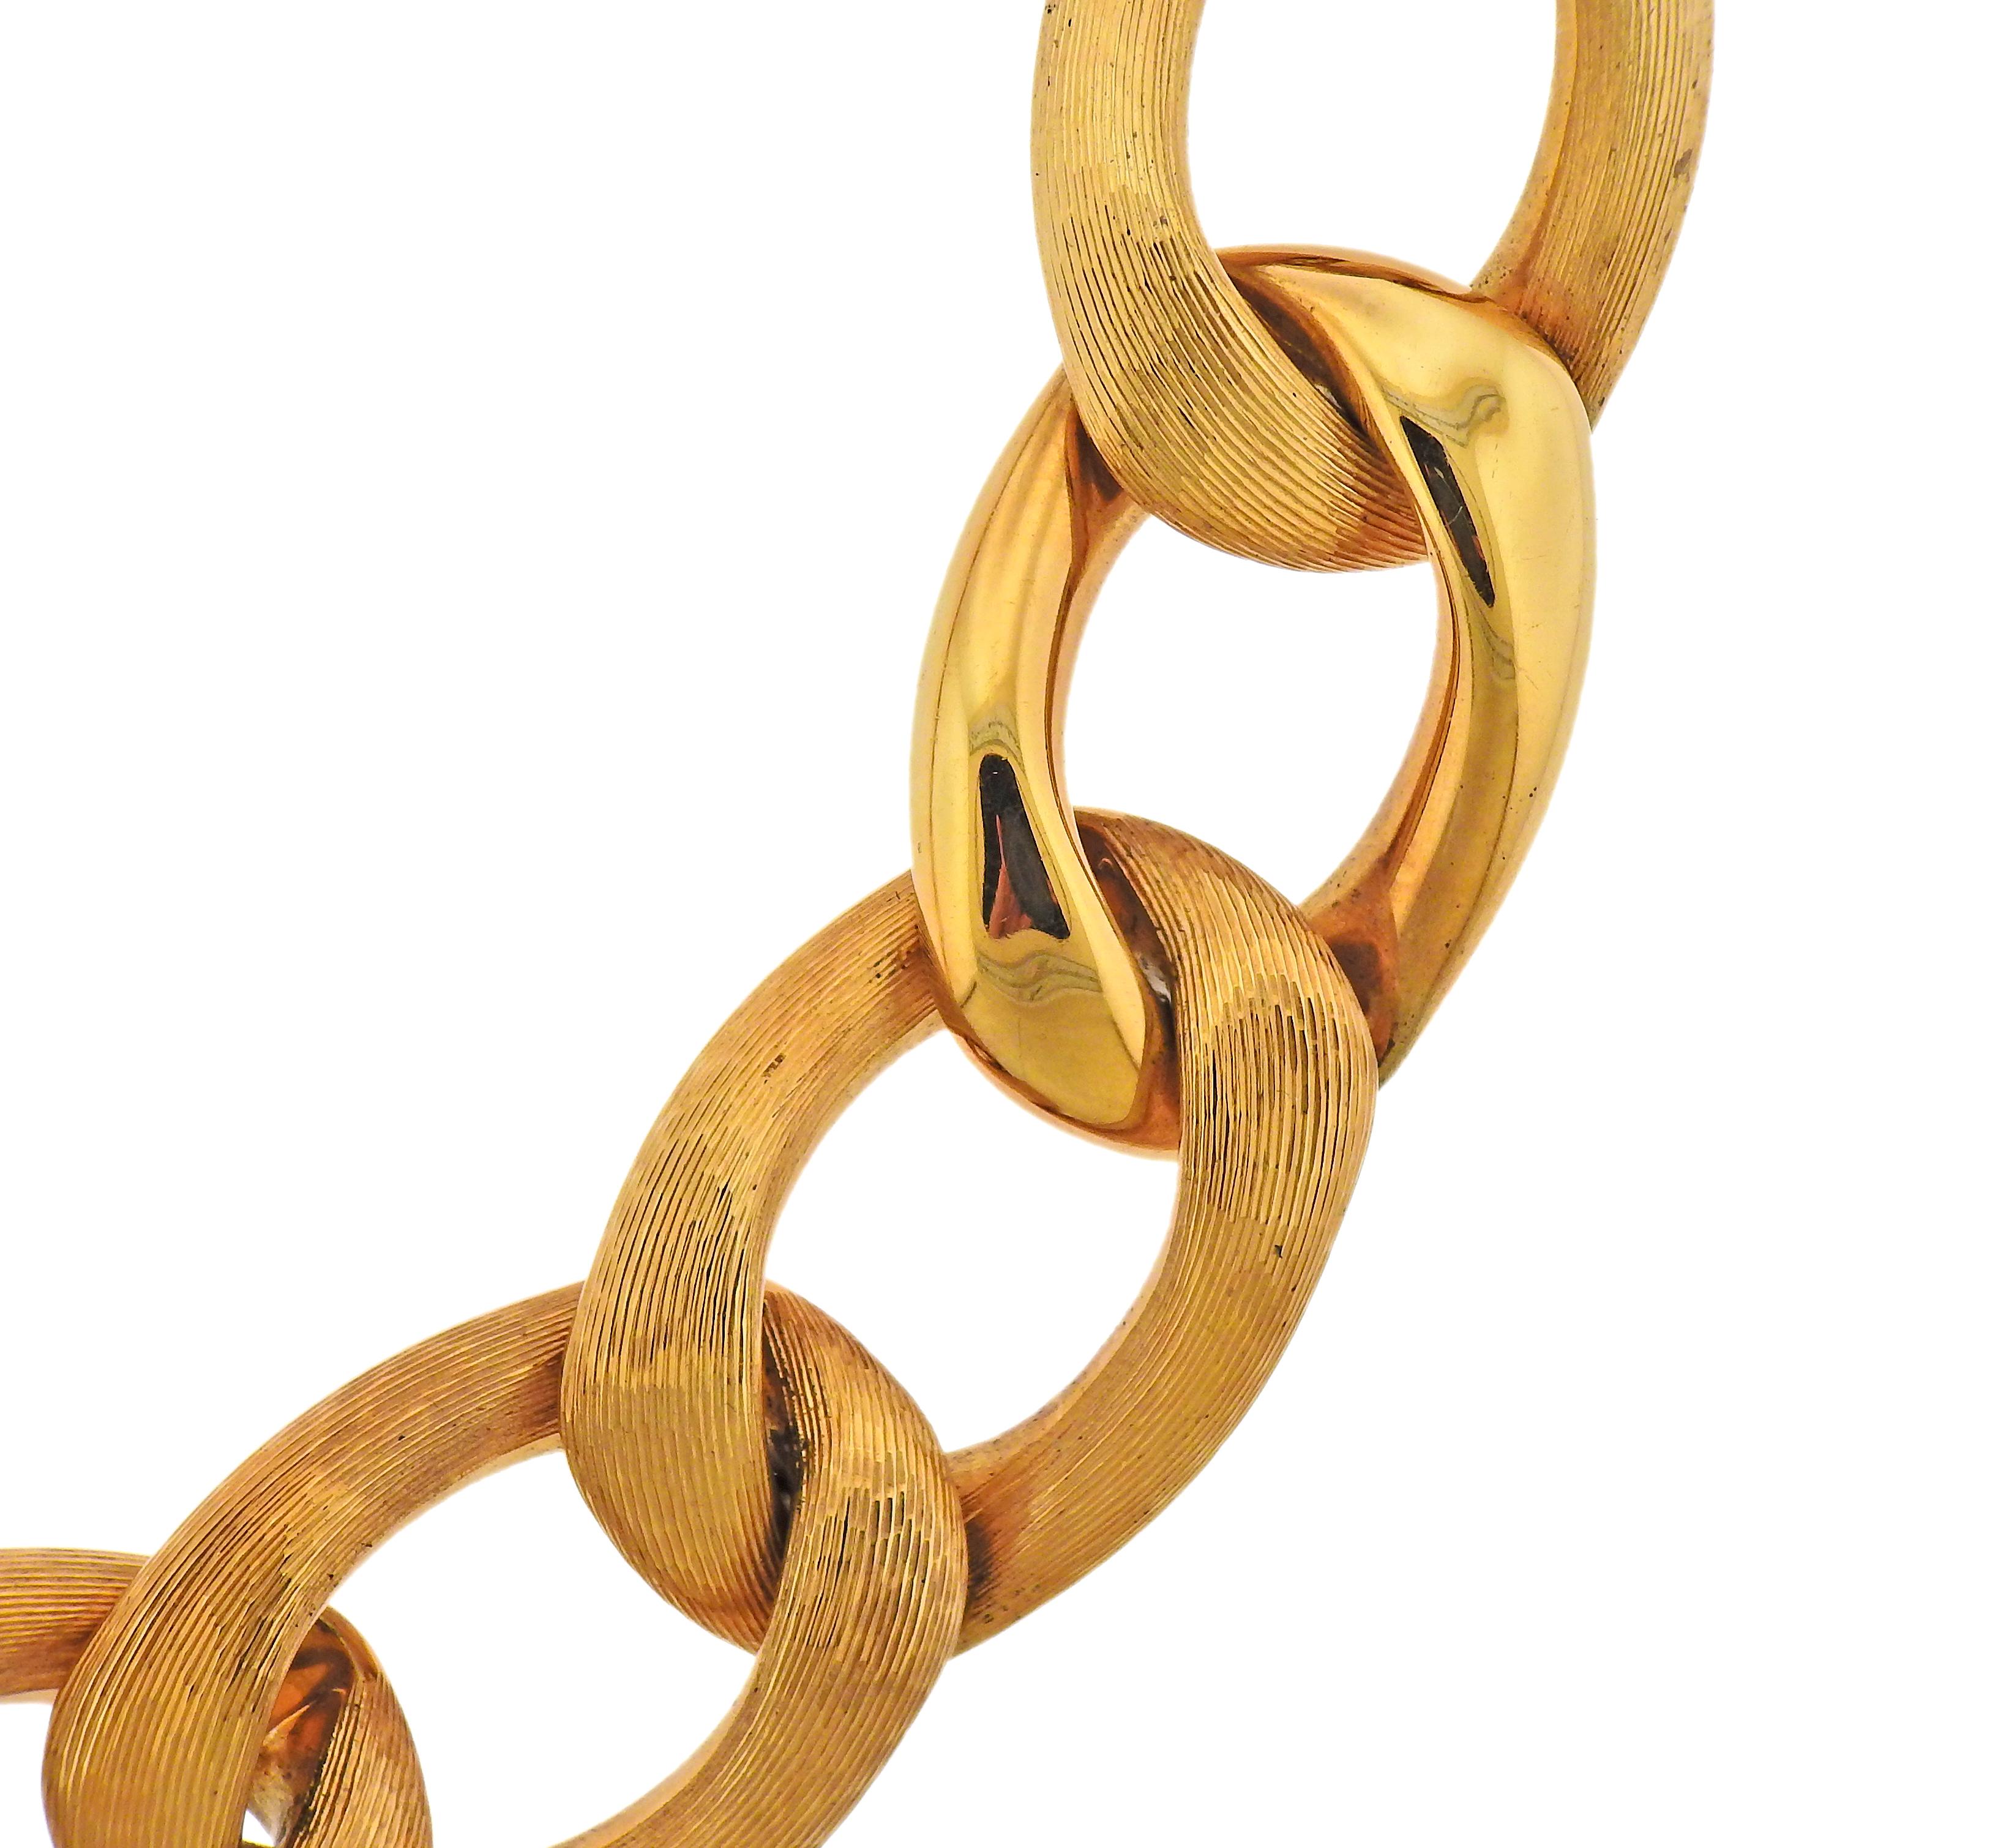 18k yellow gold link necklace. Measuring 18.5